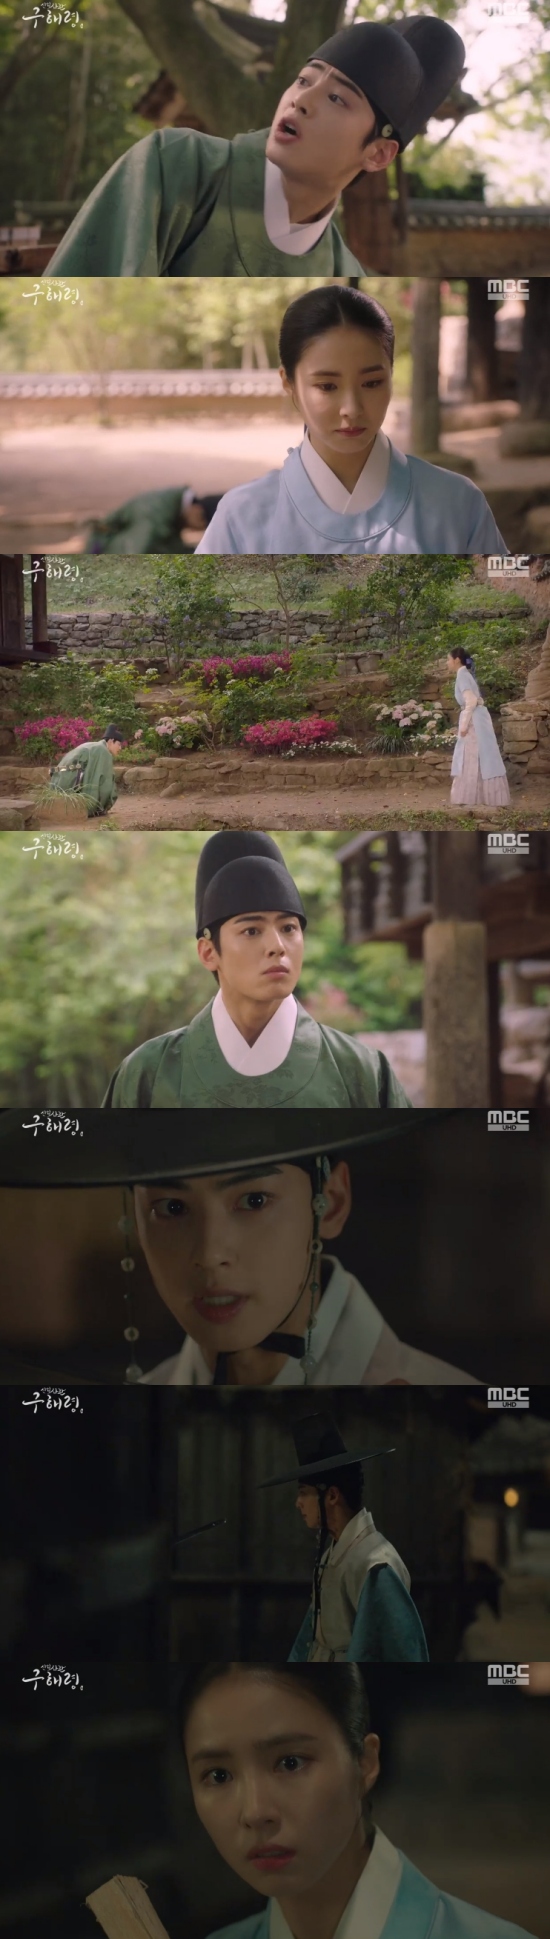 The new officer, Na Hae-ryung, pretended to be an inner tube while Jung Eun-woo was reunited with Shin Se-kyung in the palace.In the 7th and 8th MBC drama Na Hae-ryung, which was broadcast on the 25th, Lee Rim (Jung Eun-woo) was shown to be identified by Na Hae-ryung (Shin Se-kyung).The day Irim encountered Na Hae-ryung, who became Ada Lovelace, and Na Hae-ryung was wandering the road in the Nakseodang, a forbidden area.Irim said, Ada Lovelace? One official goes around the civil war.I will judge whether it is a sin or not. Na Hae-ryung hurriedly blocked Irims mouth with his own hand.Na Hae-ryung said, What the hell will you do to send me? And Irim did not know what to do with the fact that Na Hae-ryungs hands were in touch.Na Hae-ryung took his hand out late, and Irim concealed his embarrassment, saying, Where dare you touch it.Irim said, I have no intention of sending you away. There are one or two things you have done wrong with me.Last Nights Curry, Tomorrows Bread I ignored my promise and made me wait for a few hours. Na Hae-ryung said, Last Nights Curry, Tomorrows Bread Promise?What did I promise you? Irim said, Did I send a letter? Na Hae-ryung said, I have never received it.Do you not know what the promise is? It is only when mutual agreement is reached that the promise is established. At this time, Heo Sam-bo (Seongji-ru) appeared, and Irim tipped the fact that Na Hae-ryung was a fake plum.The Nines finally called Lee Rim, saying, Sejo of JoseonMama, and Husambo said, Sejo of JoseonMama is sleeping in there.I just went in for a walk and slept. Sejo of JoseonMama and I hid the identity of Na Hae-ryung to the end.Hussambo later said, What kind of guy is that GLOW, the worlds lightest-mouthed GLOW that has been blown hes a plum to people, and find out what the GLOW is to identify Mama.A day, rumors that plums are Sejo of Joseon will spread across the sea to Cheongguk.Lee Lim pretended to be an insider and called Na Hae-ryung again, and Hussambo had to sit in the seat of Lee Lim and pretend to be a member of the Daewonwon.How do you find me? asked Gu, who pretended to convey the words of Sejo of Joseon instead and held him up.Irim says, You have informed your sins. He says, You have told me to follow my instructions.Sejo of Joseon was a heart, he said, and Na Hae-ryung was forced to clean up as Irim told him.After all, Na Hae-ryung couldnt resist his anger and stepped hard on Irims foot, and Irim said, Is this a mistake? and Gu Na Hae-ryung said, I will.Do some work, he said.I am sorry for the insult to the plum novels, but I did not know the deep pain of your father.At that time, I thought that the good-looking Sunbi was wasting paper by writing a novel about the salt, and I wanted to feel the affection of men and women. Especially, Na Hae-ryung and Irim were close to each other while teasing each other.In the last scene, Irim was attacked by a man, and in the process, Na Hae-ryung learned that Irim was a prince, raising the tension of the drama.Photo = MBC Broadcasting Screen